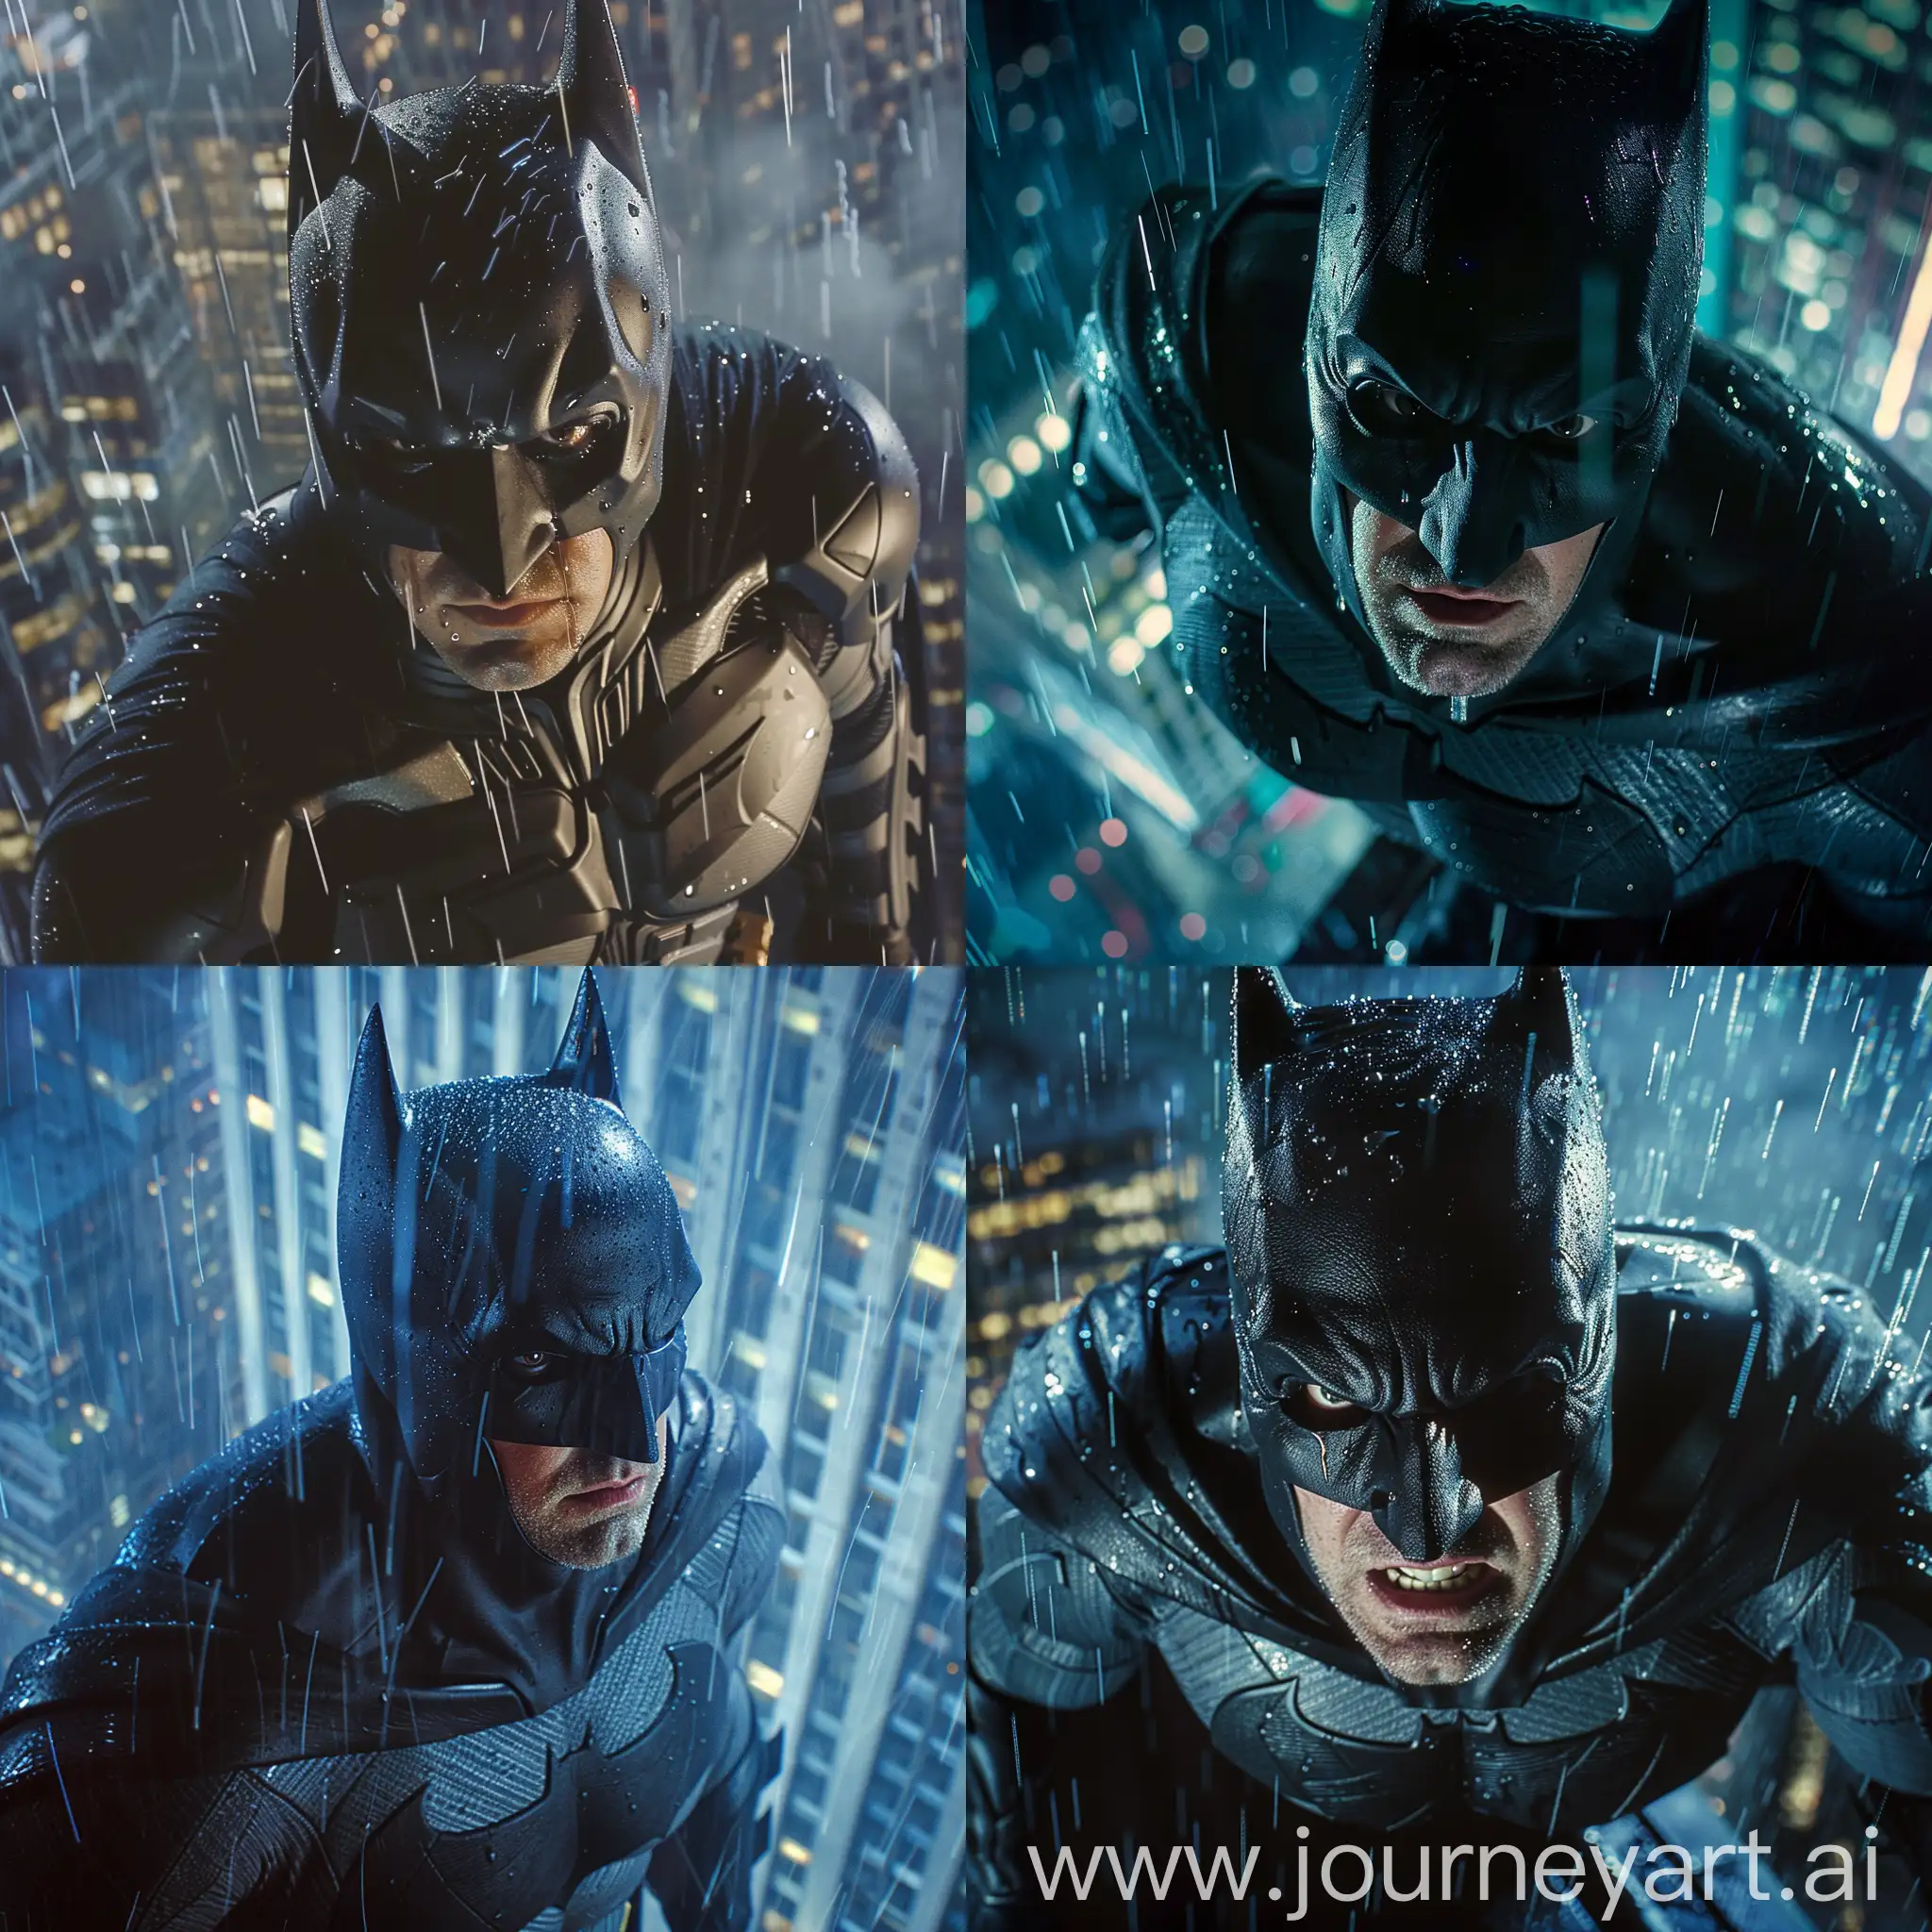 Batman Standing on top of skyscraper at night in the rain, raindrops running down his face and cowl,  extreme close up, cinematic